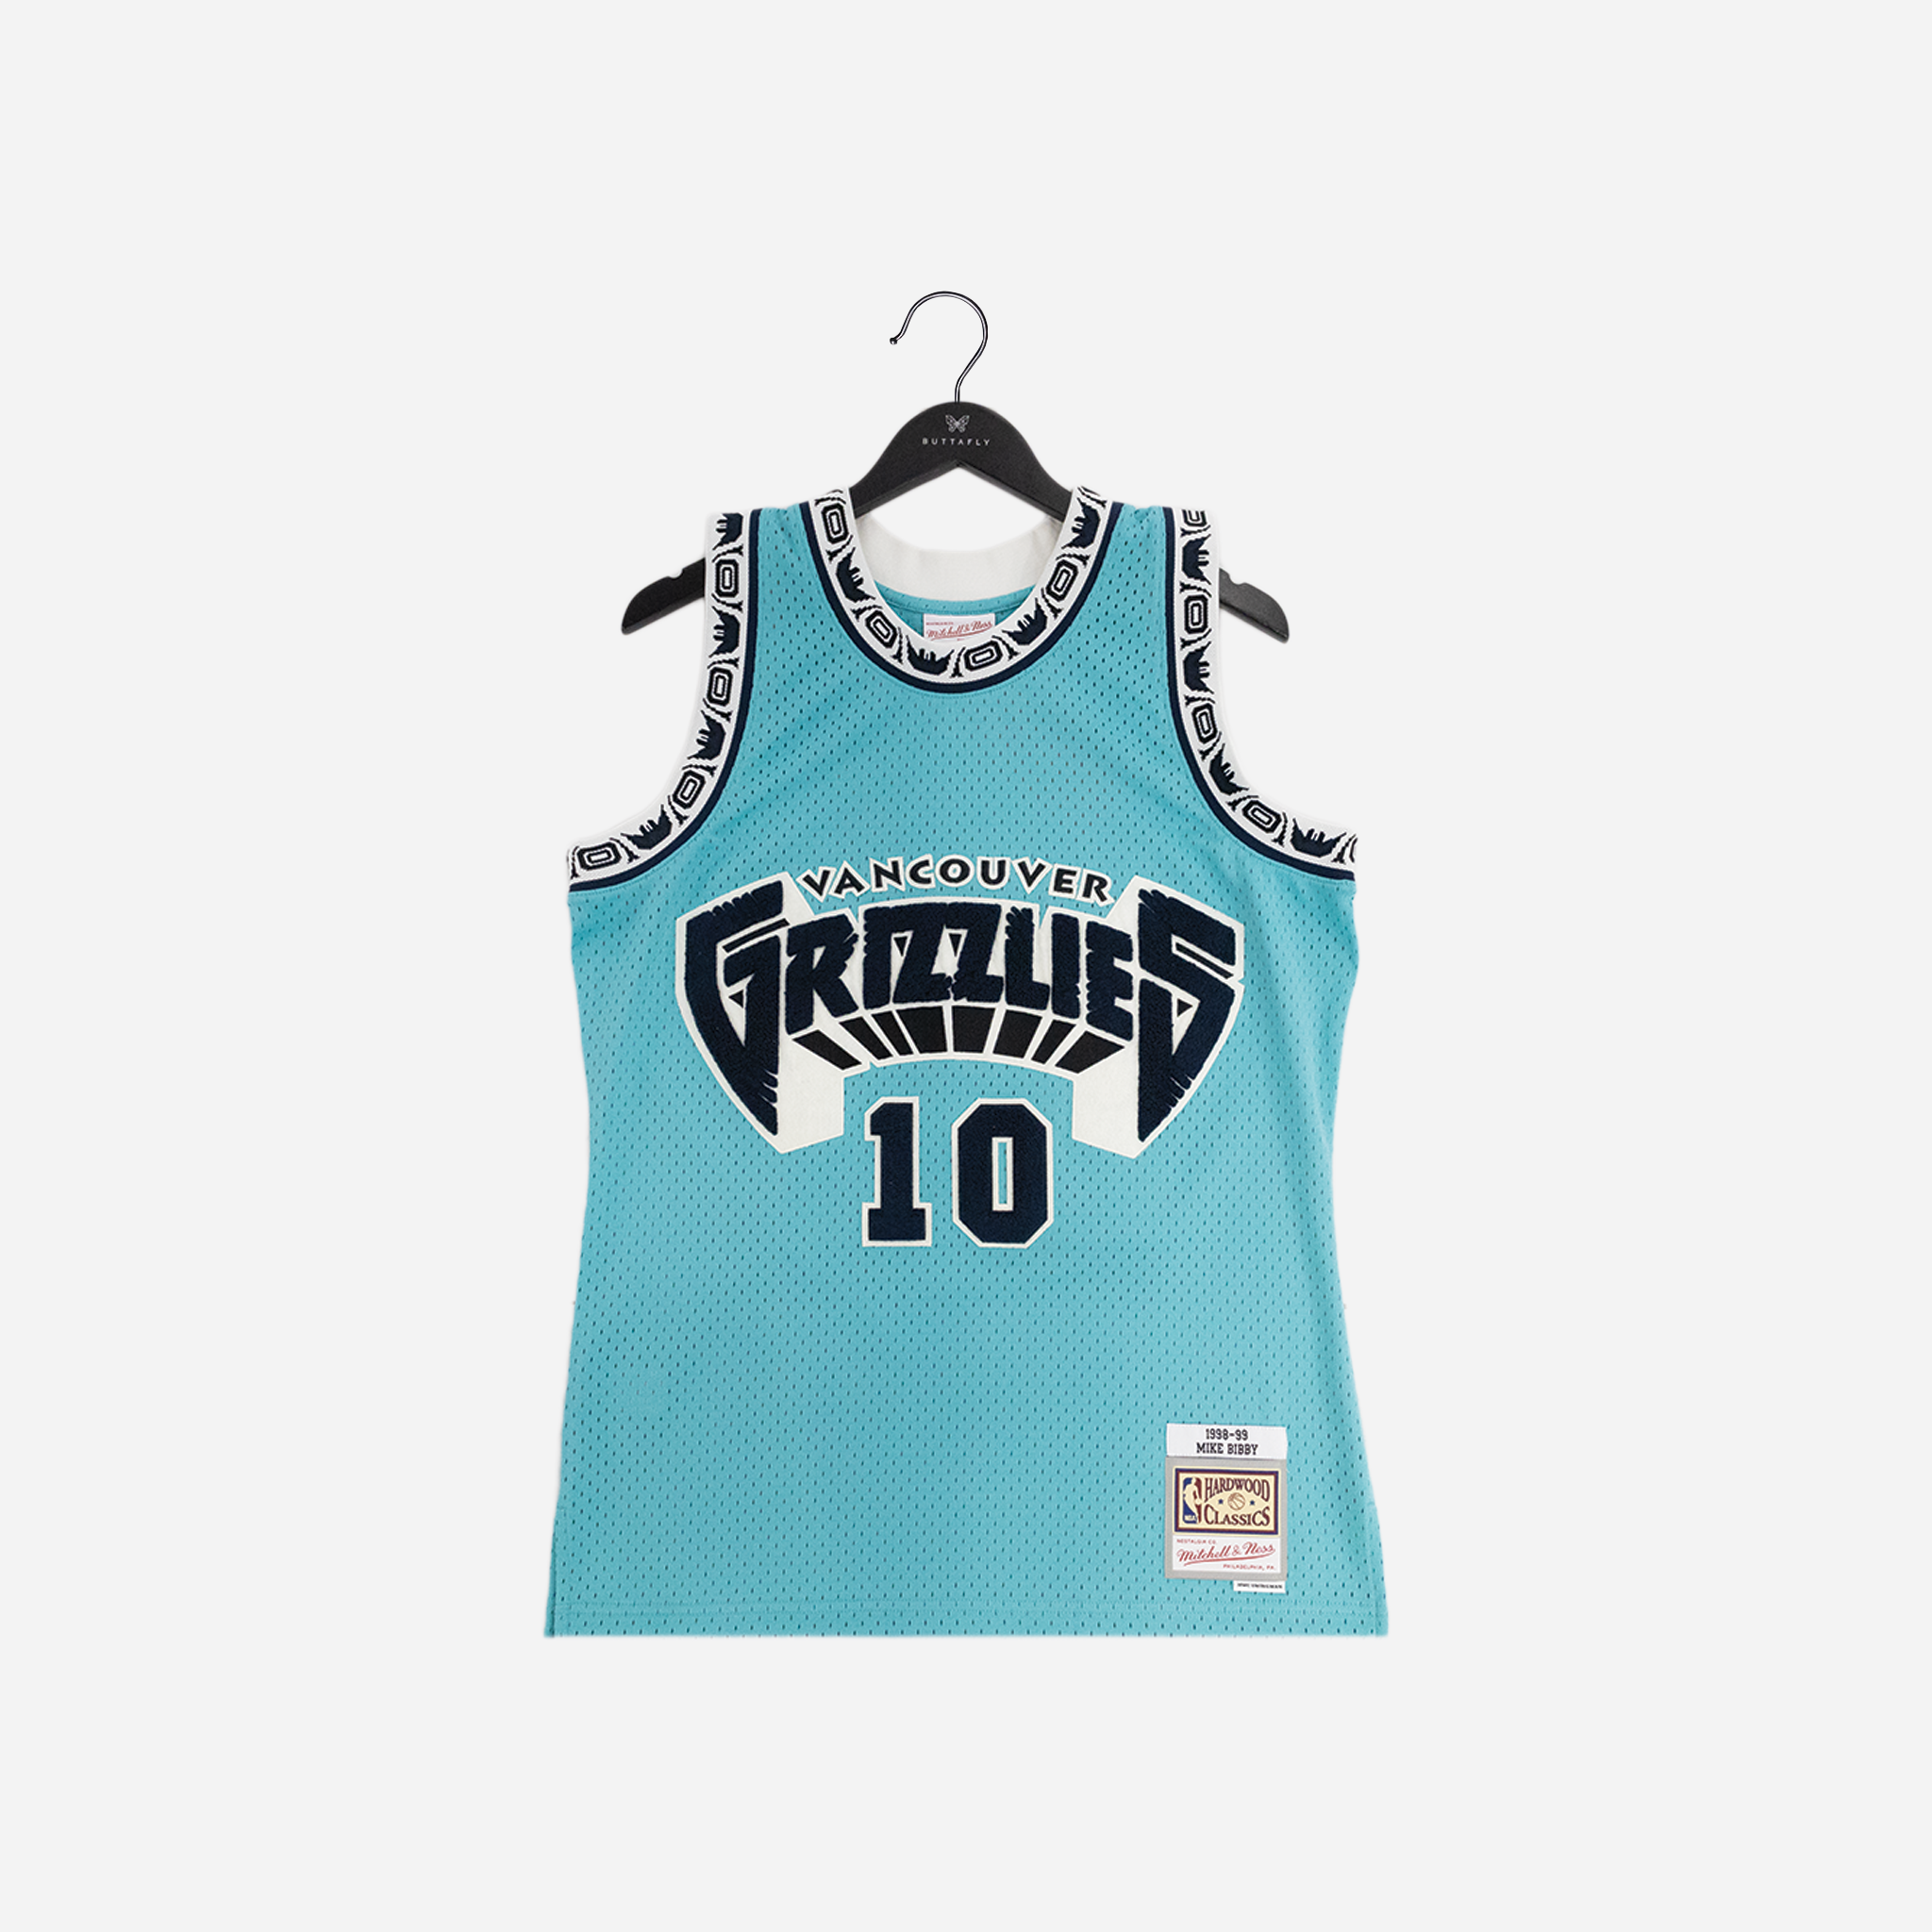 Men's Vancouver Grizzlies Mike Bibby Mitchell & Ness White 1998/99